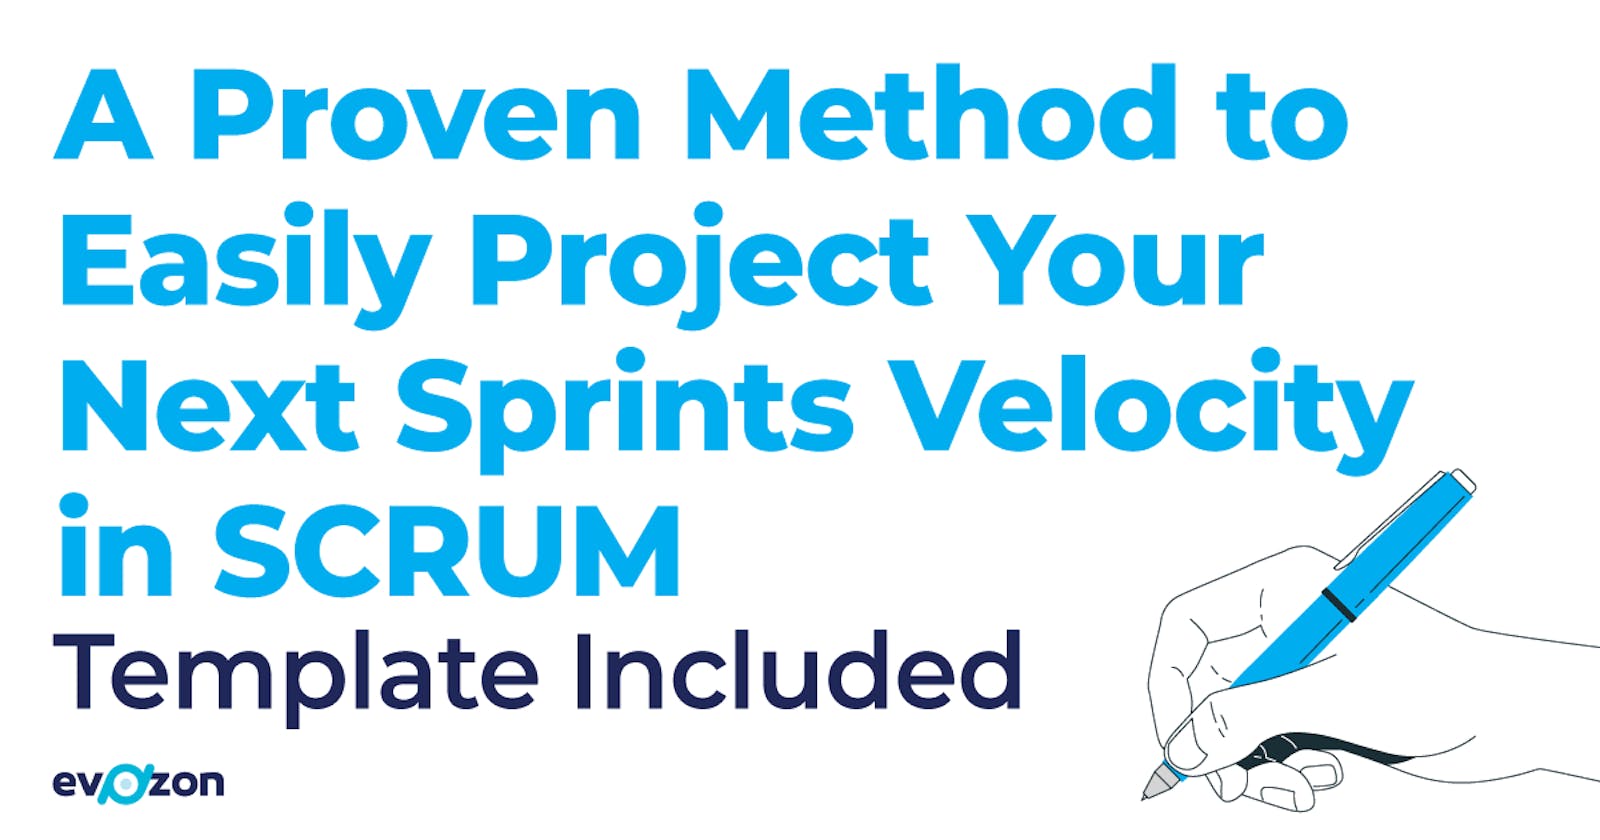 A Proven Method to Easily Project Your Next Sprints Velocity in SCRUM [Spreadsheet Template Included]